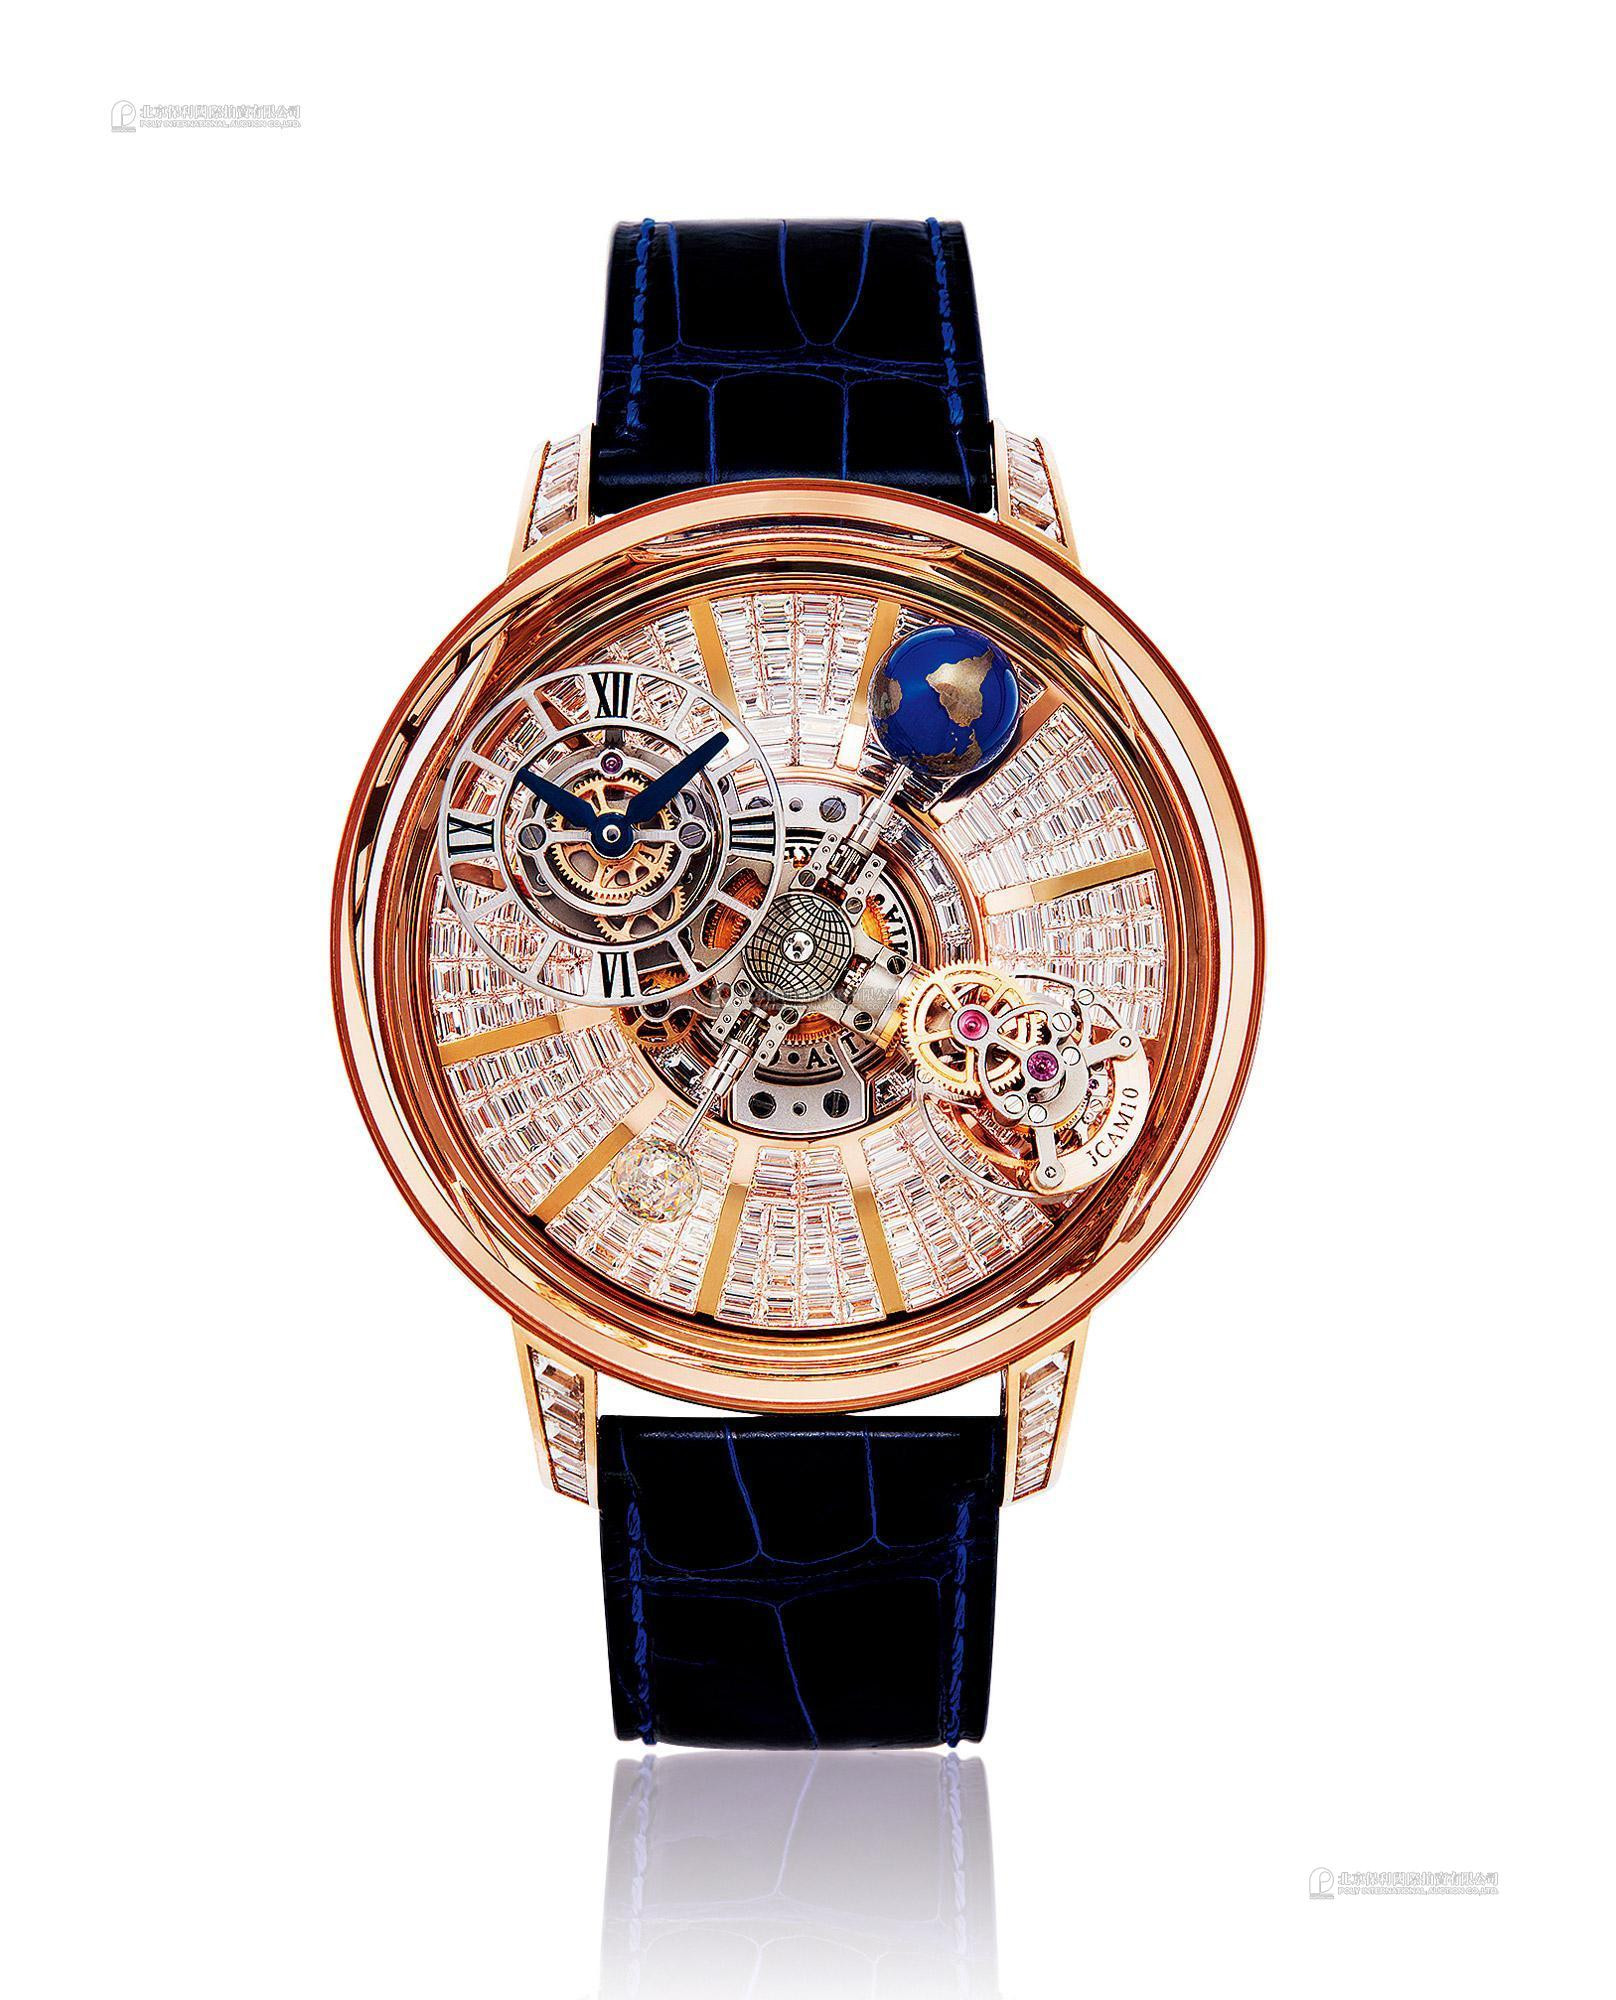 JACOB & CO A LIMITED EDITION ROSE GOLD AND DIAMOND-SET TOURBILLON MANUALLY-WOUND WRISTWATCH WITH SKELETONISED DIAL